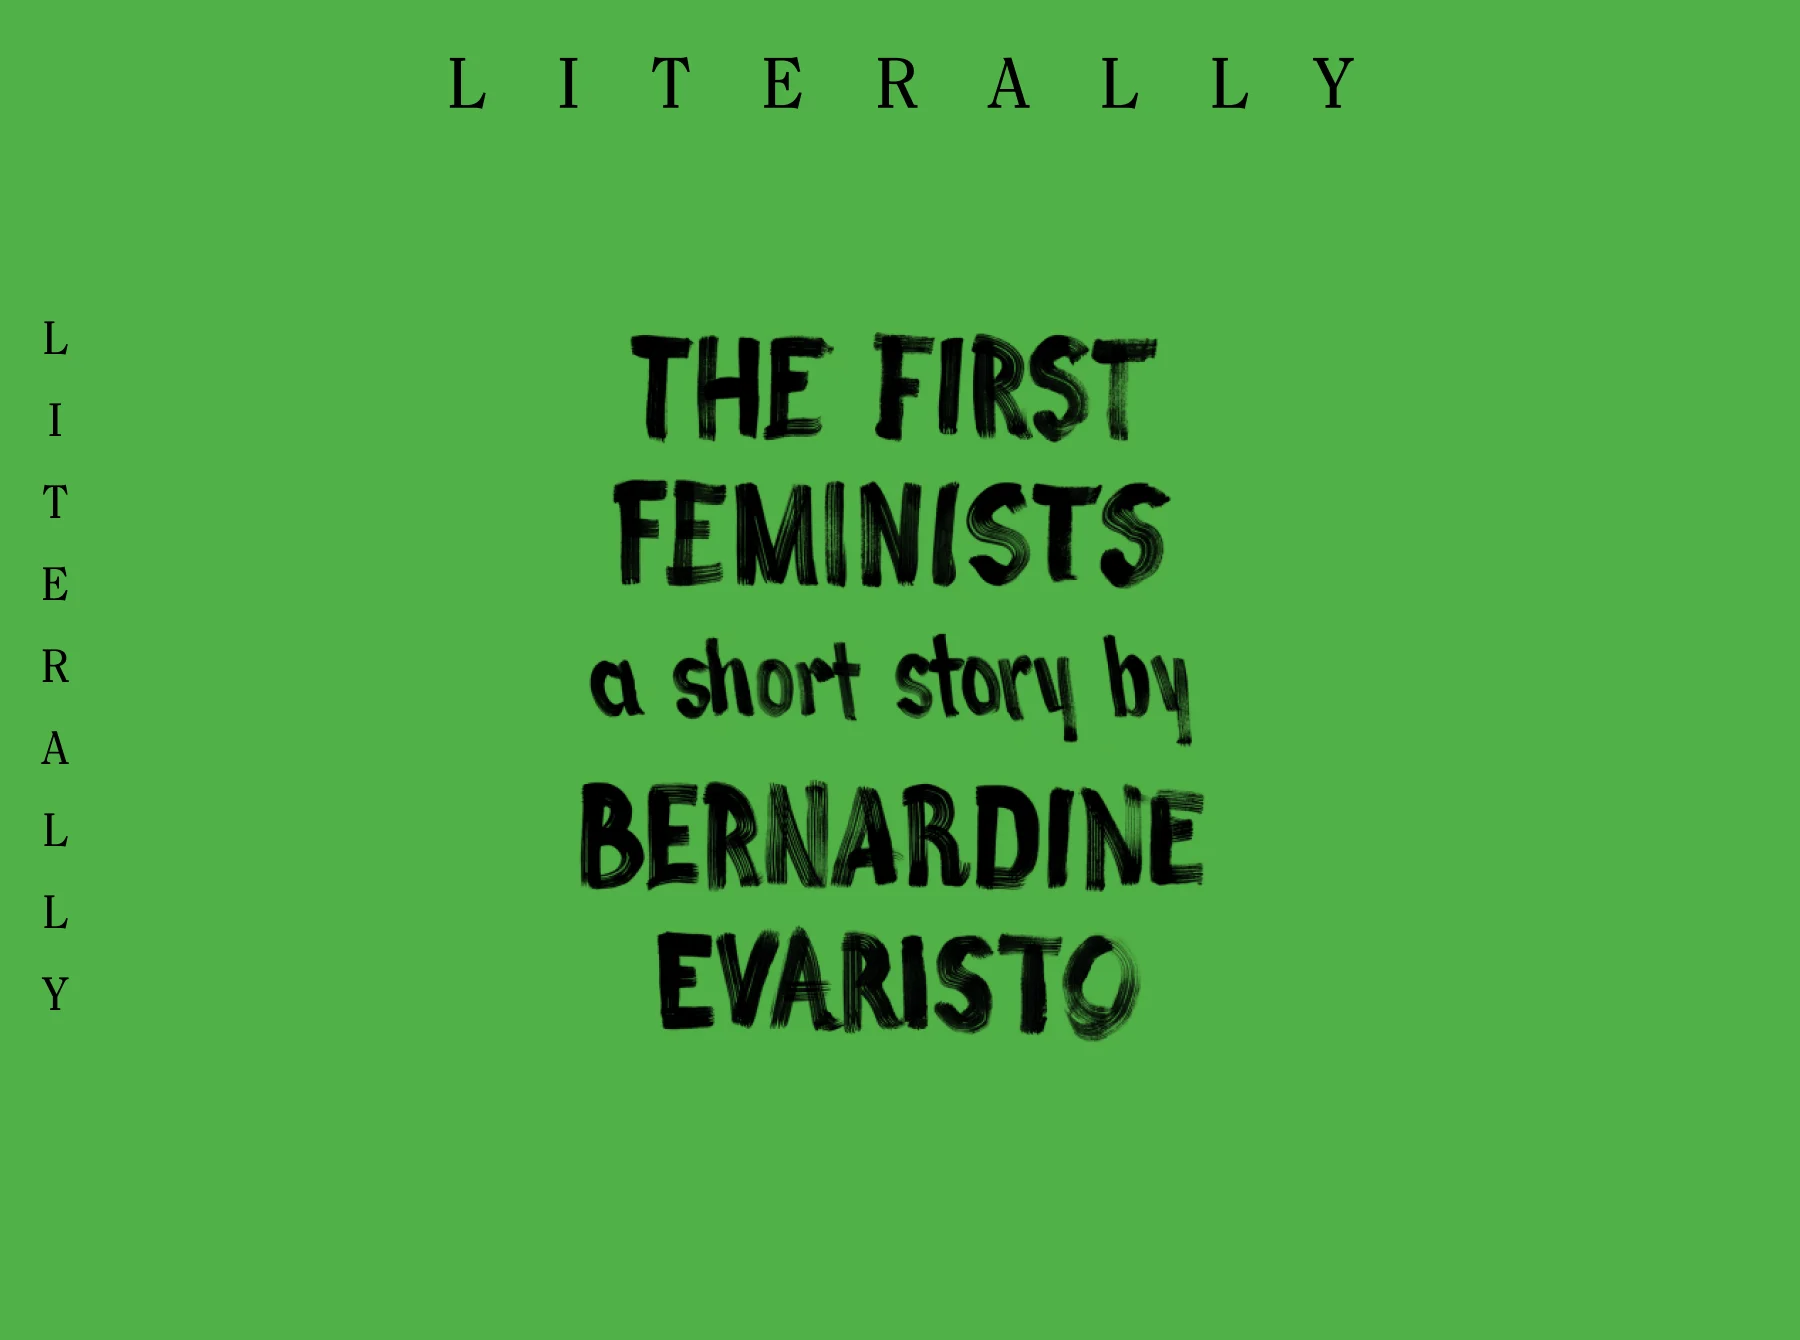 The First Feminists